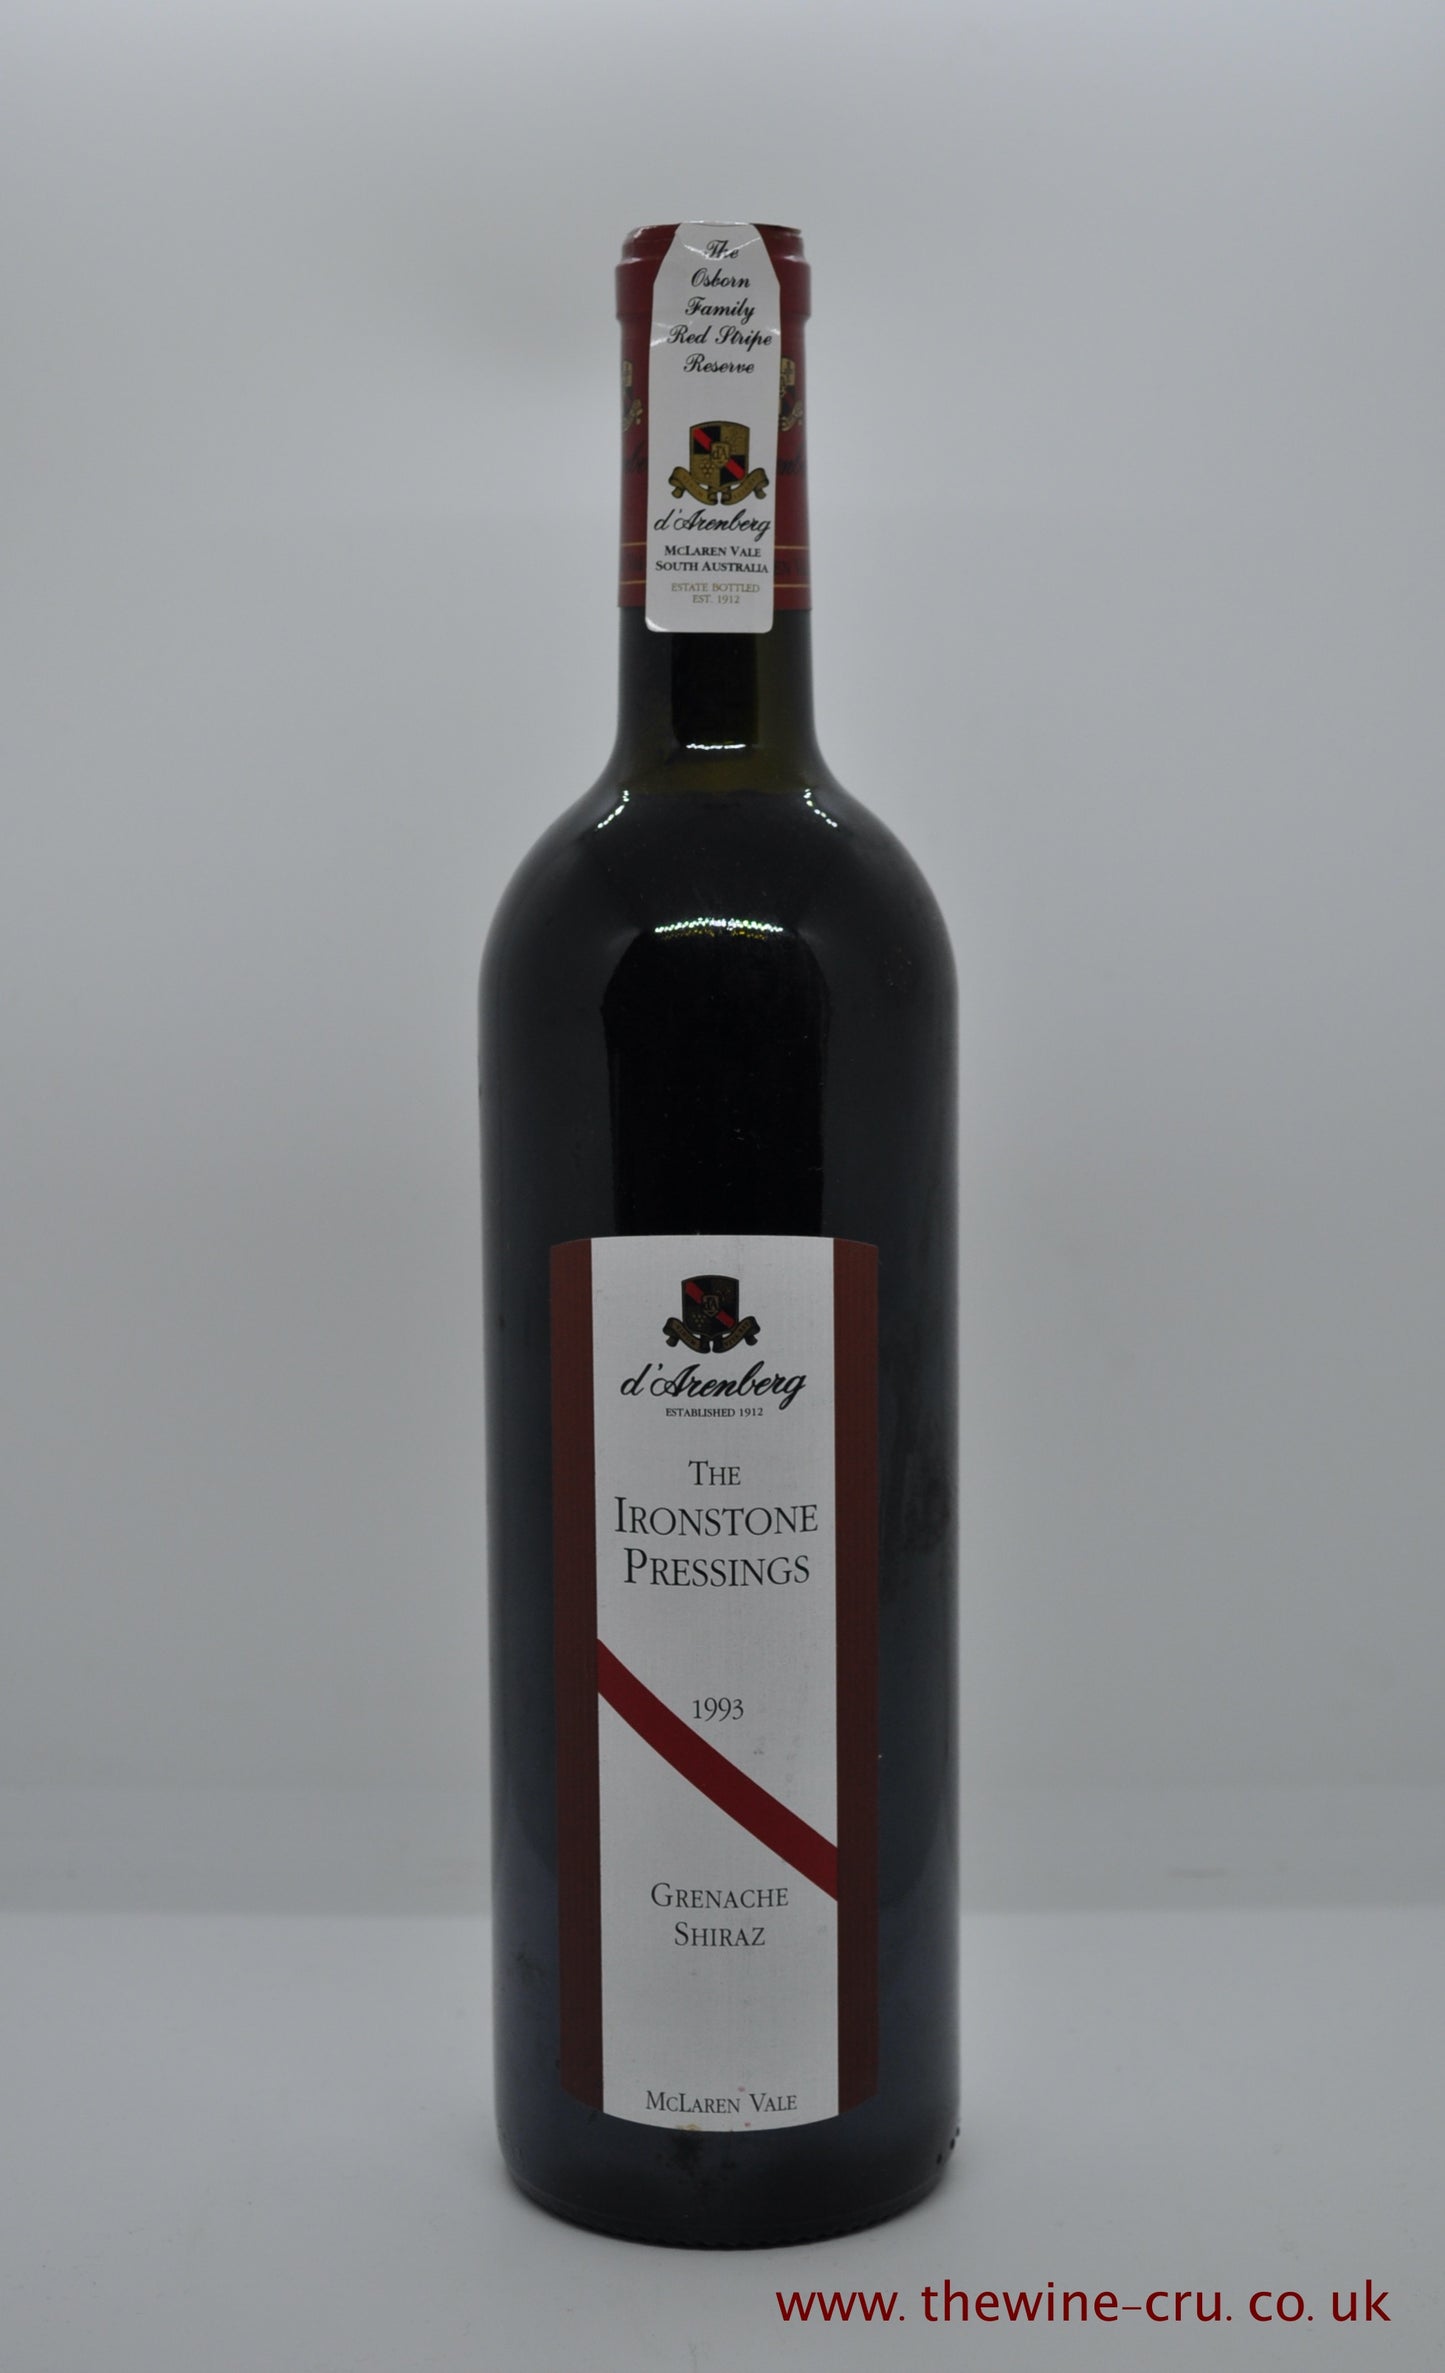 A bottle of 1993 vintage red wine. d'Arenberg Ironstone Pressings 1993. Australia. Immediate delivery. Free local delivery. Gift wrapping available.